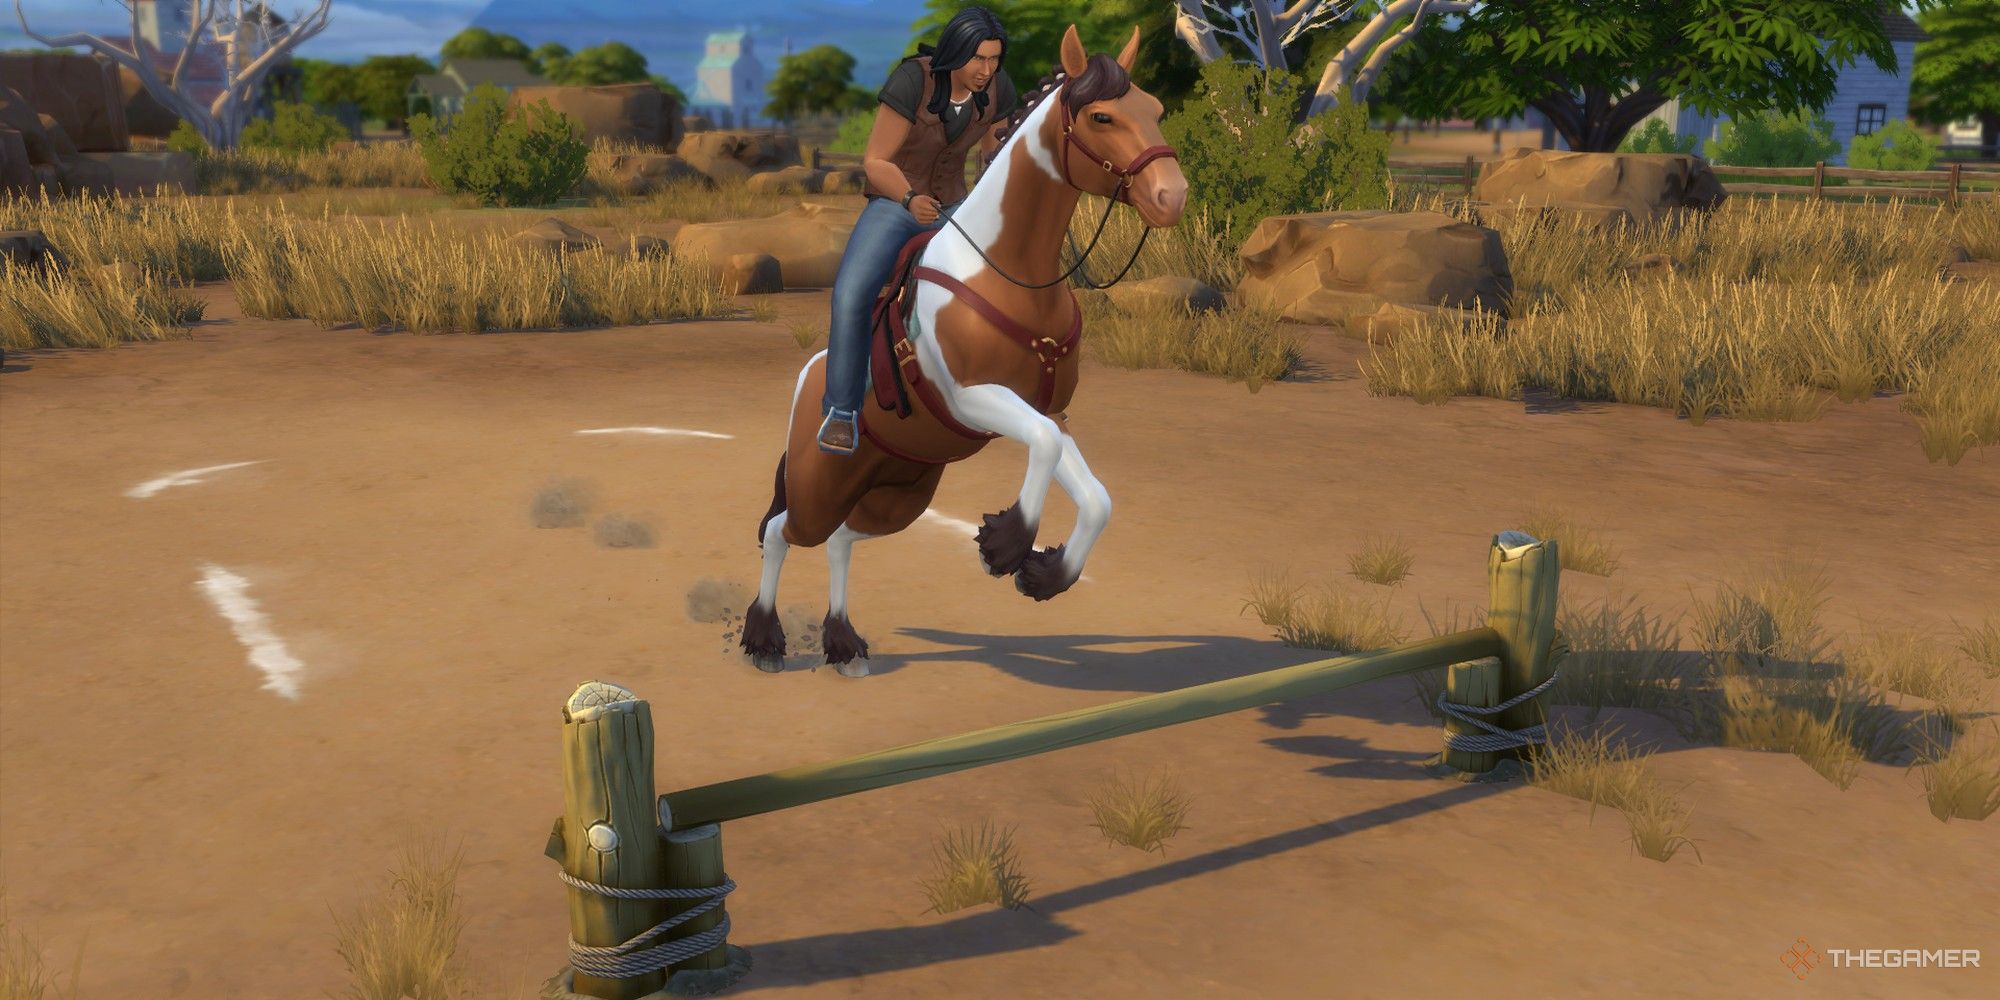 sims 4 horse ranch championship rider aspiration guide umber grove jumping his horse over a horse jump